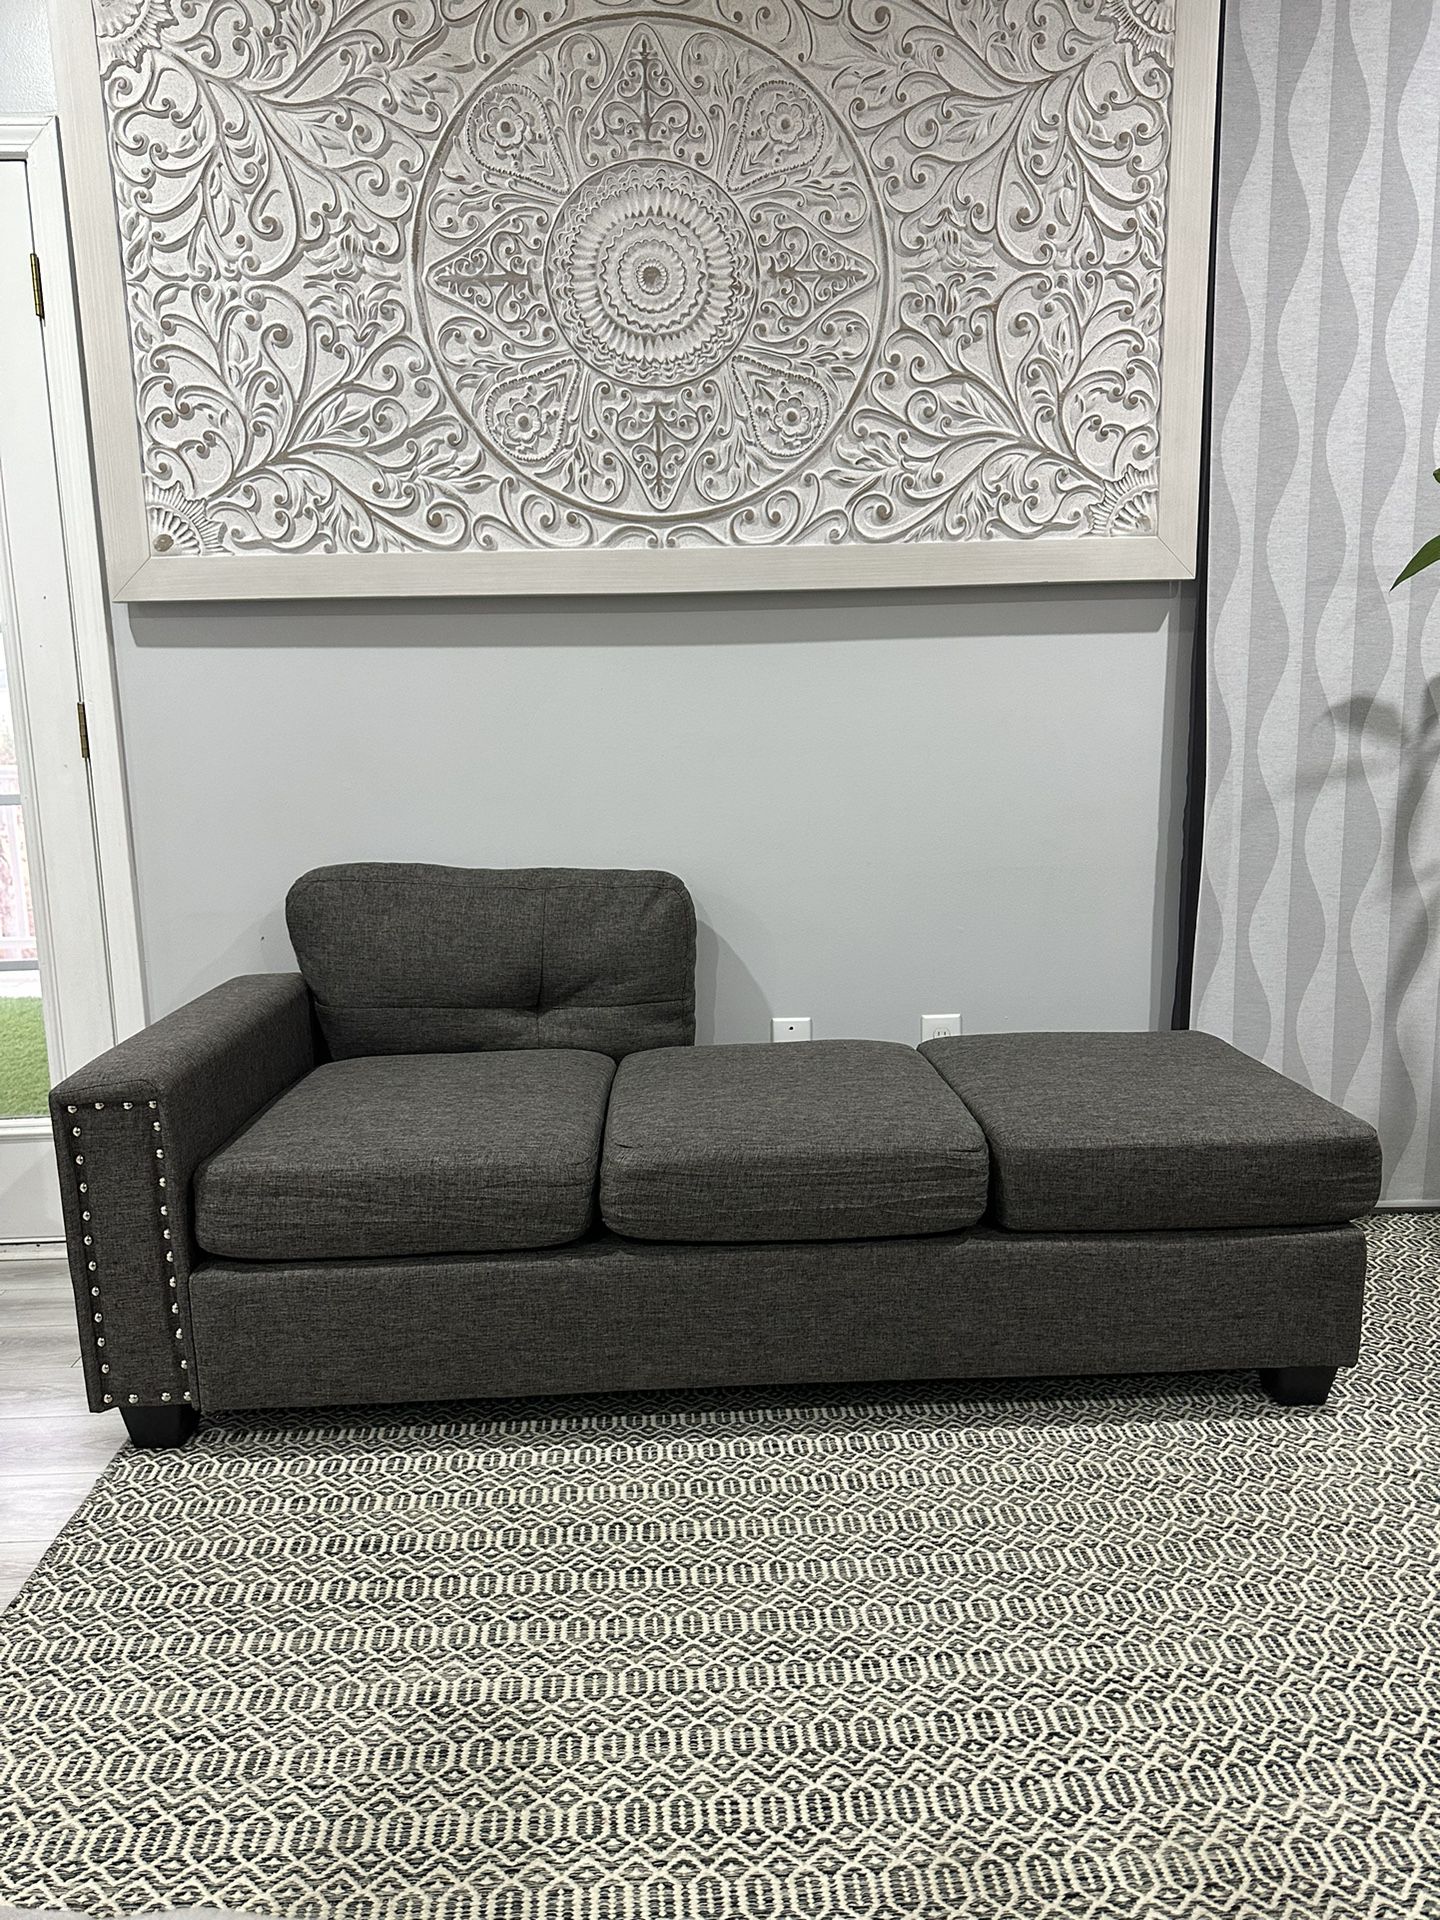 New Upholstered gray sofa with missing back and pillow. 74 inches long.